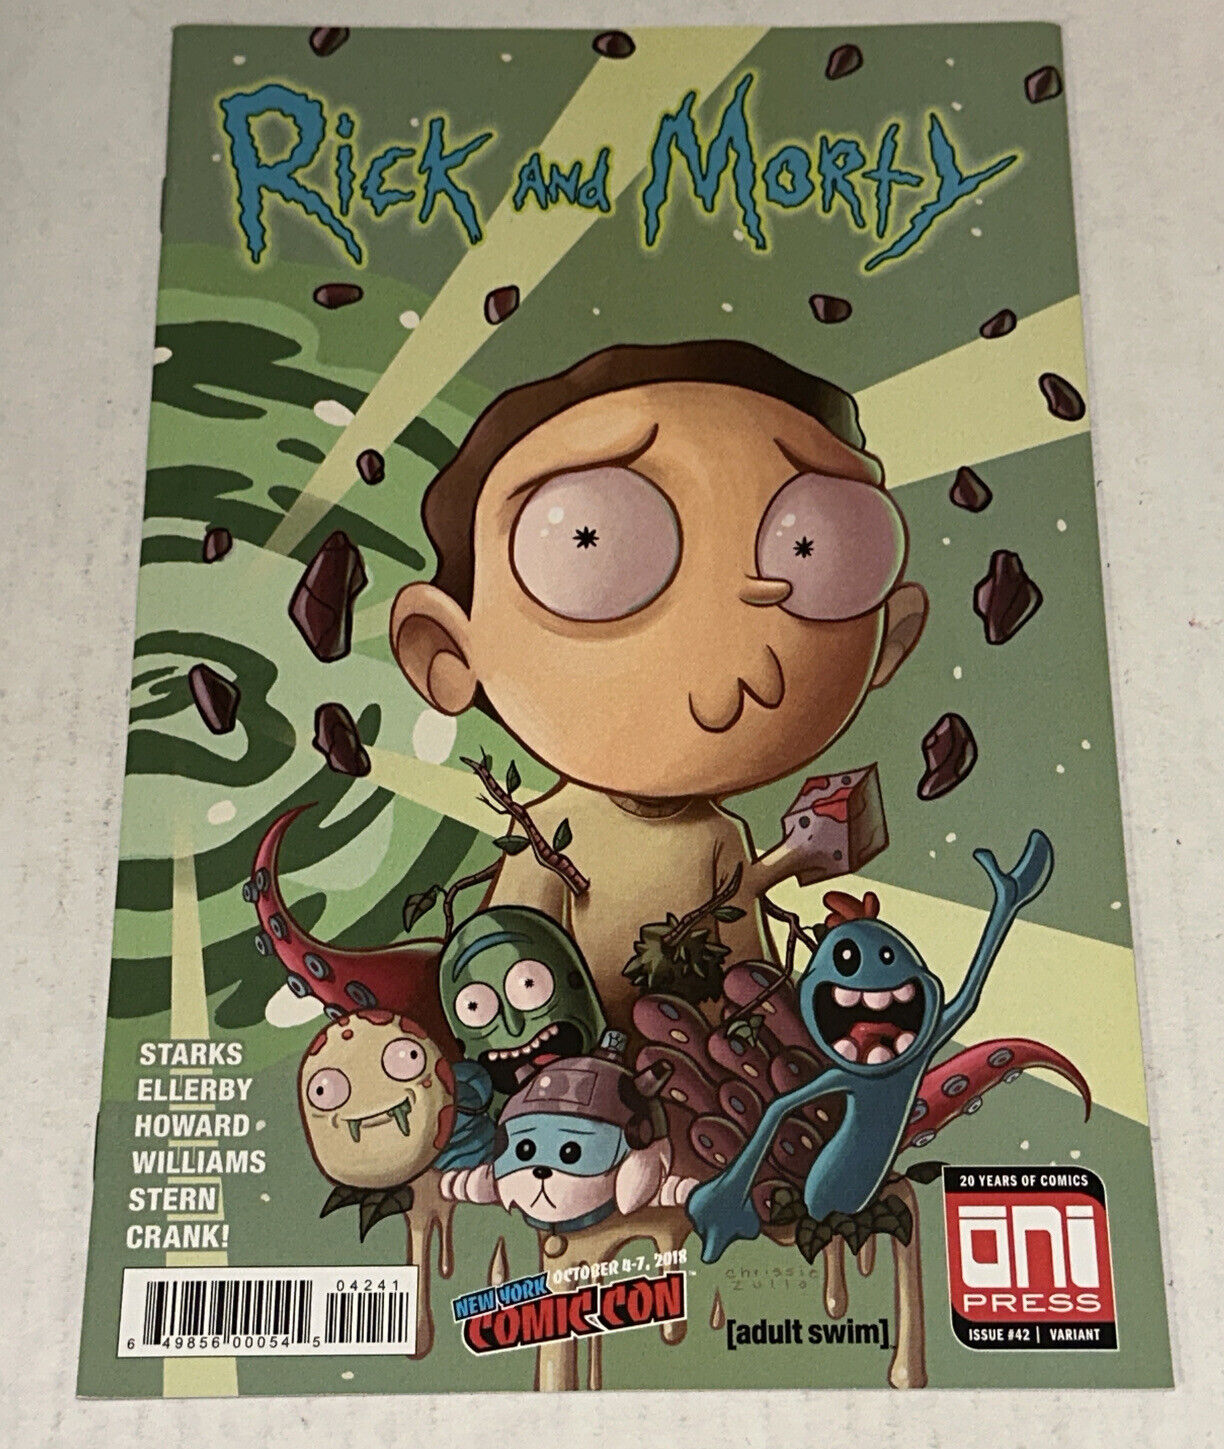 NYCC NY COMIC CON 2018 VARIANT RICK & MORTY #42 CHRISTIE ZULLO CONNECTS WITH #41